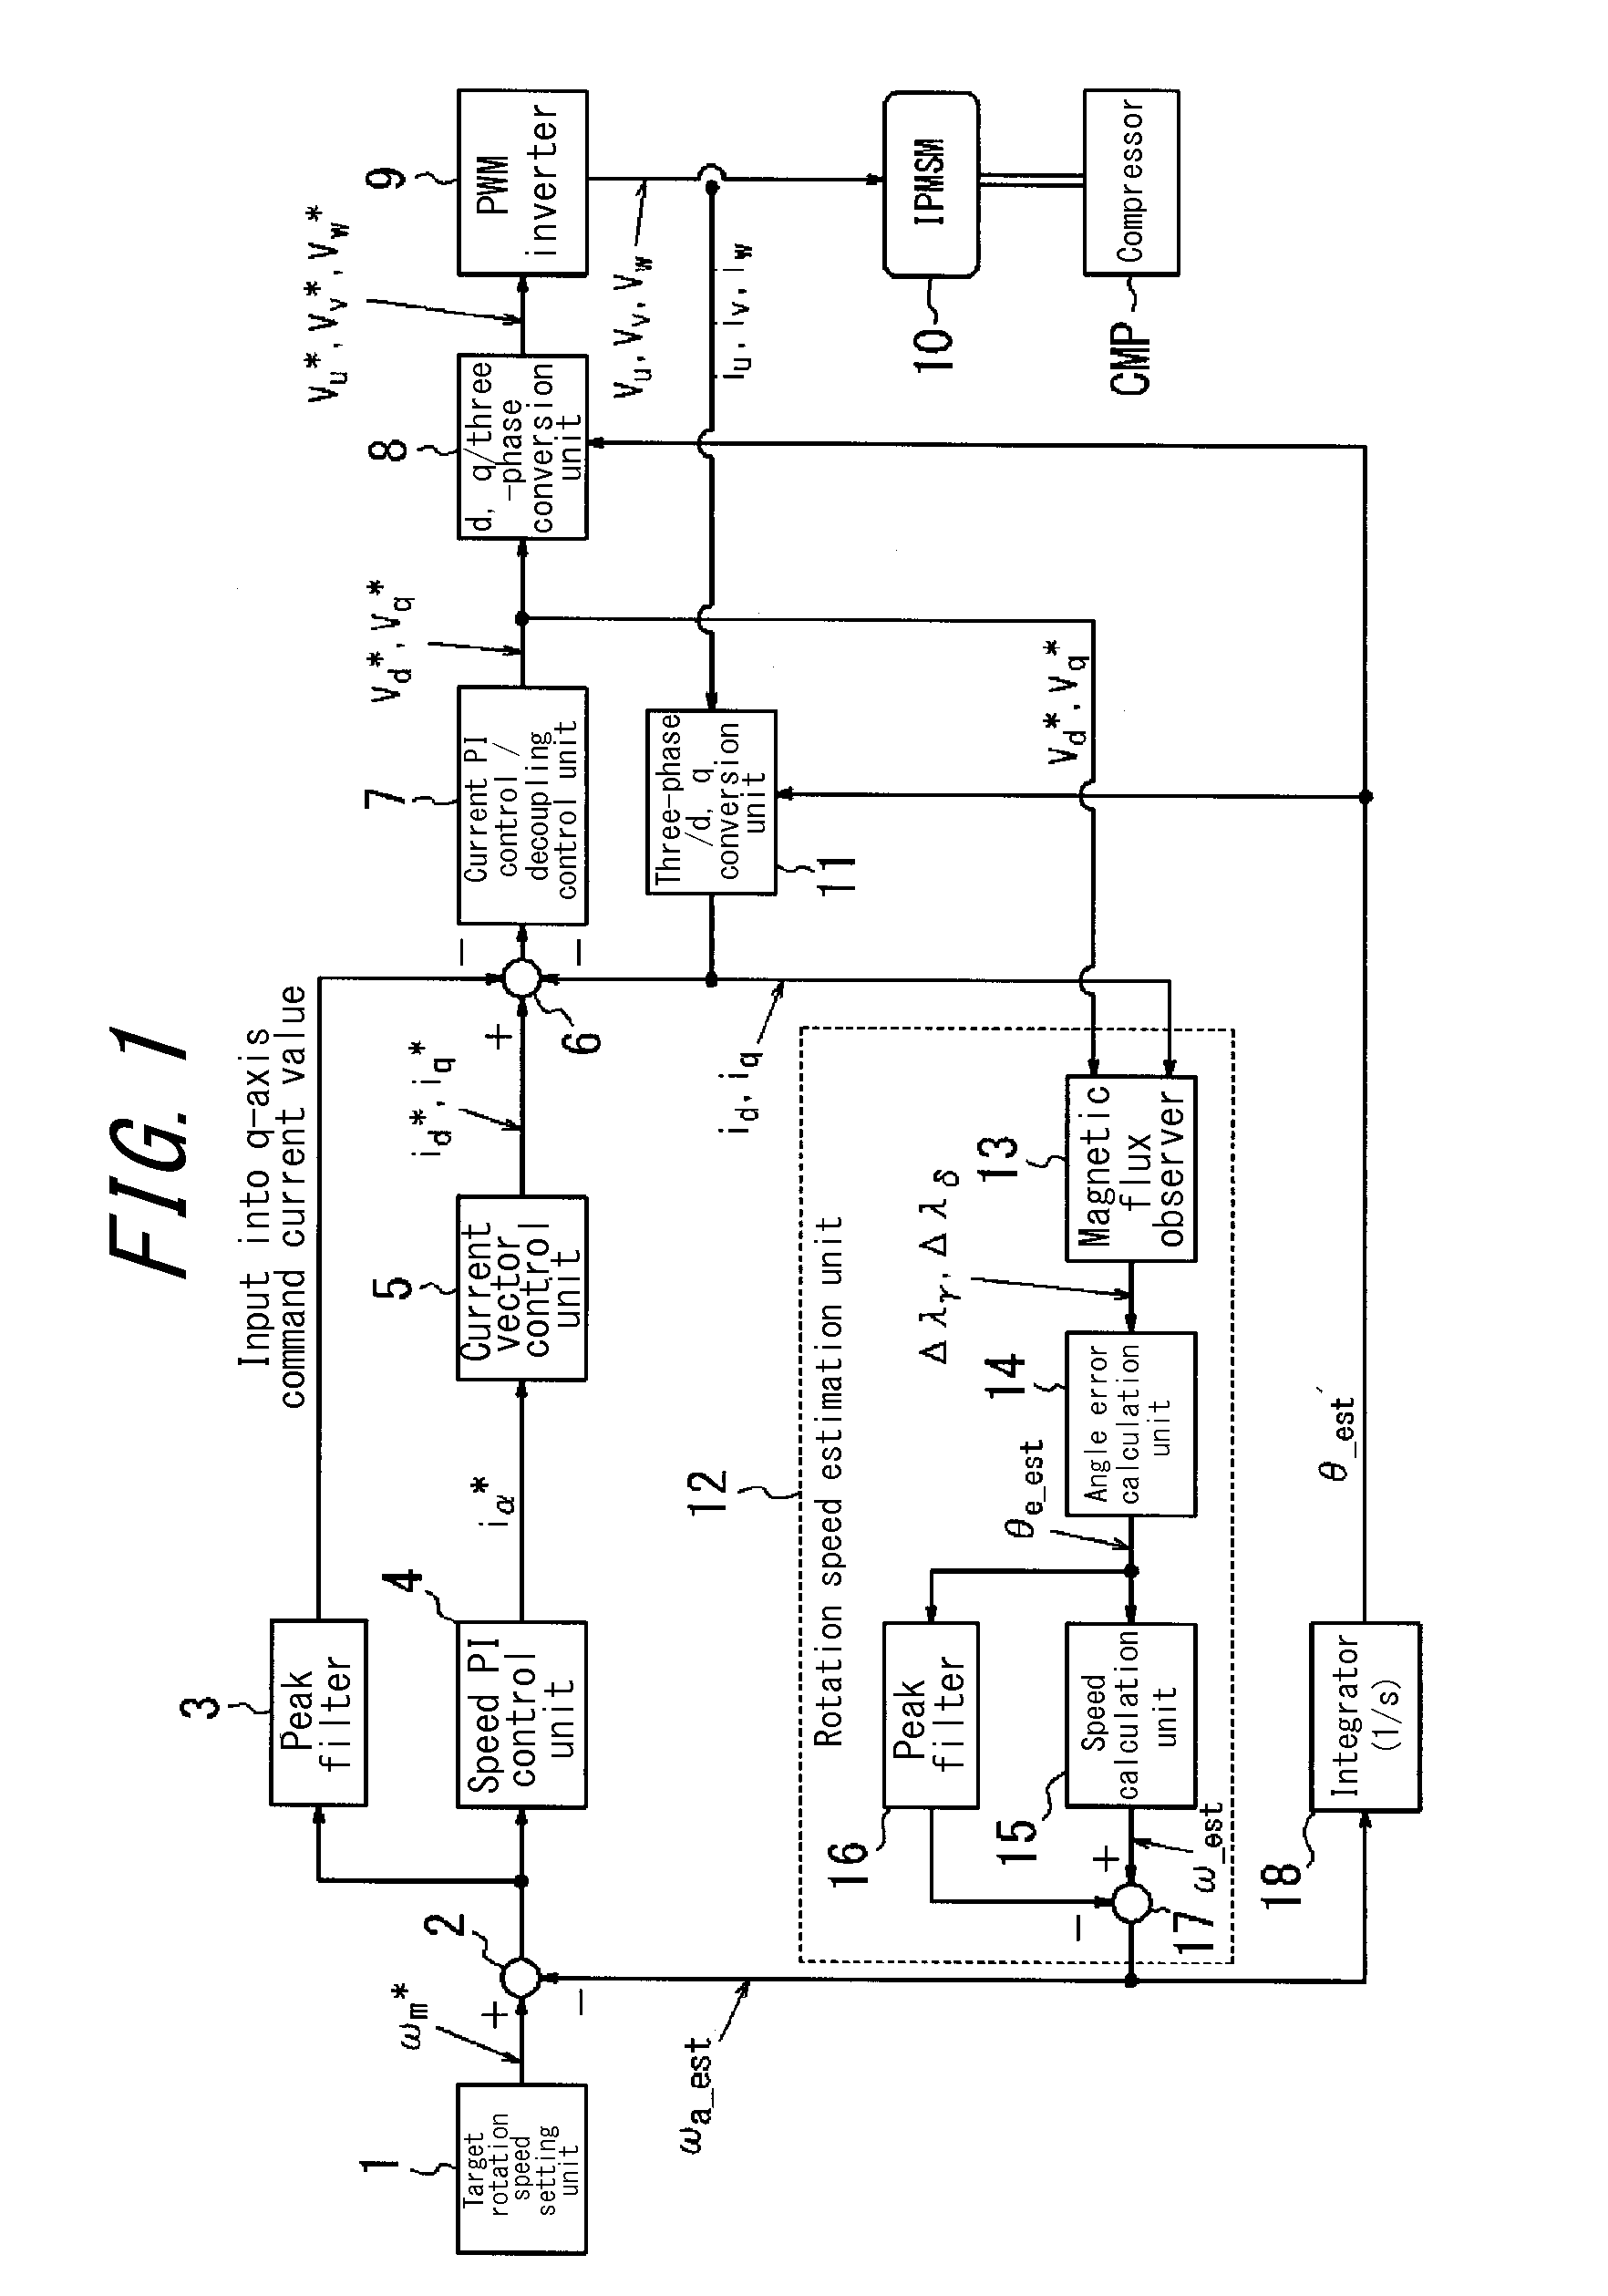 Electric Motor Control Device